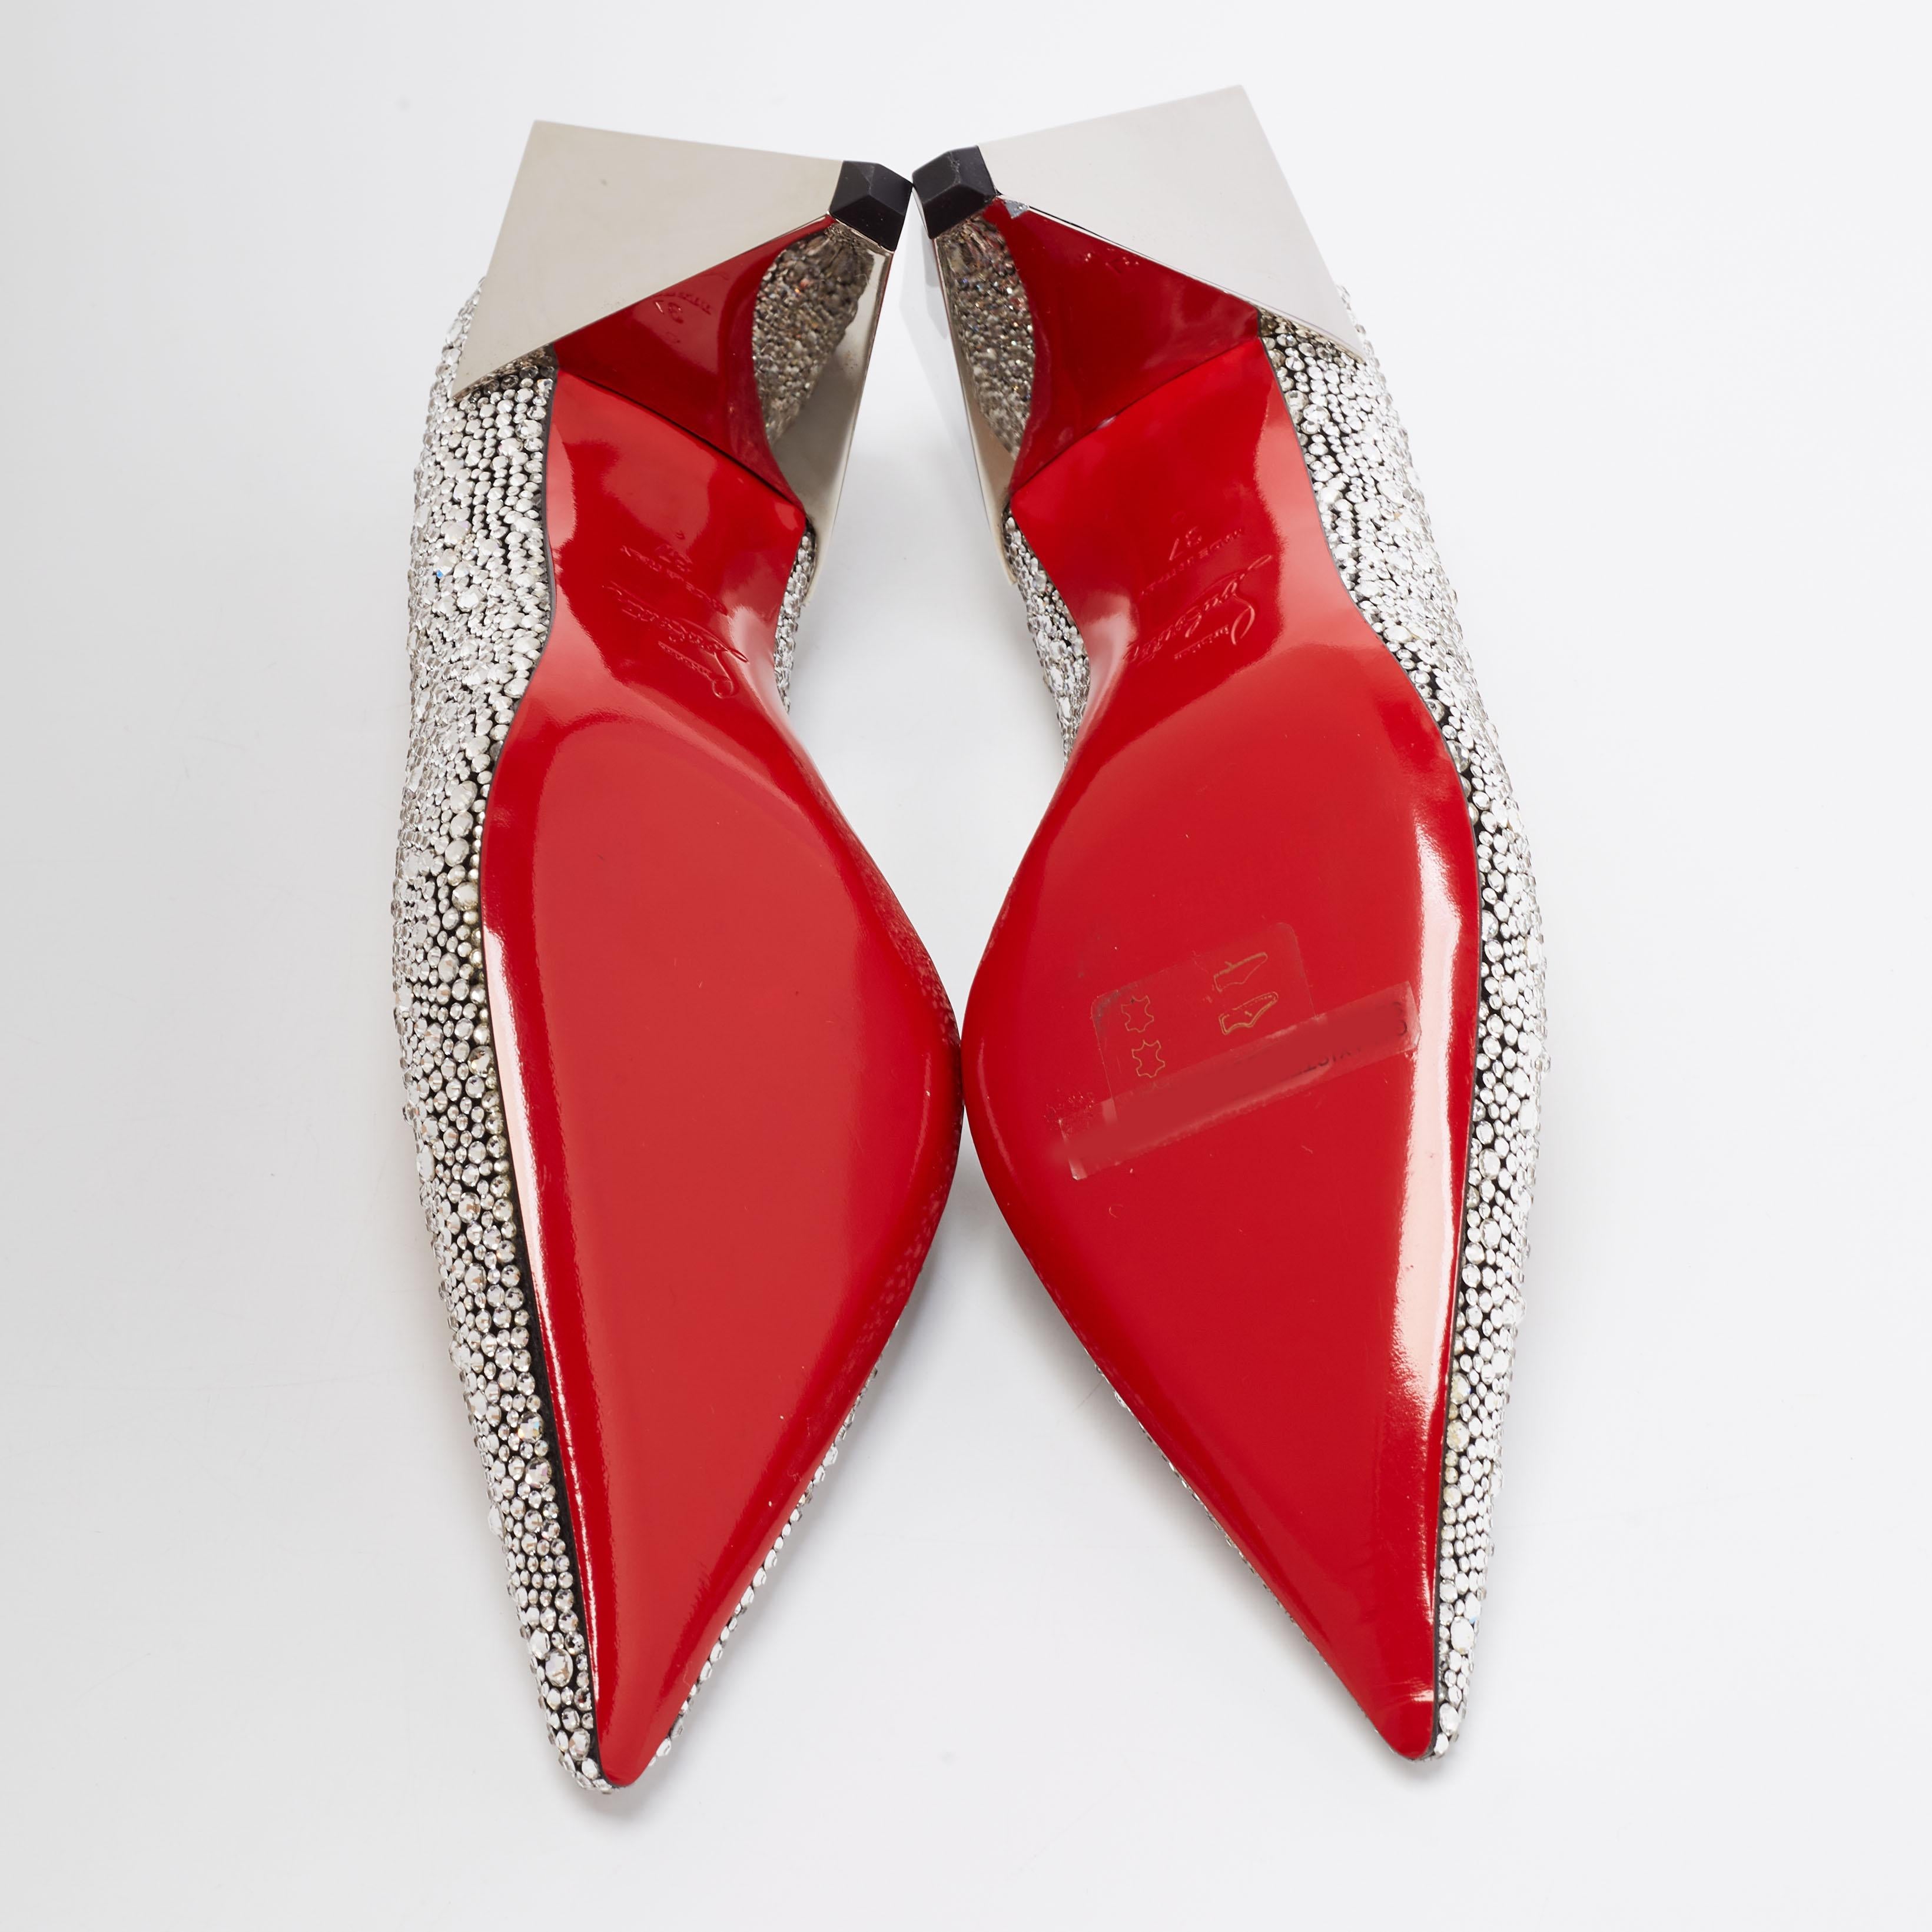 Christian Louboutin Silver Suede Galaxister Strass Pumps Size 37 For Sale 1